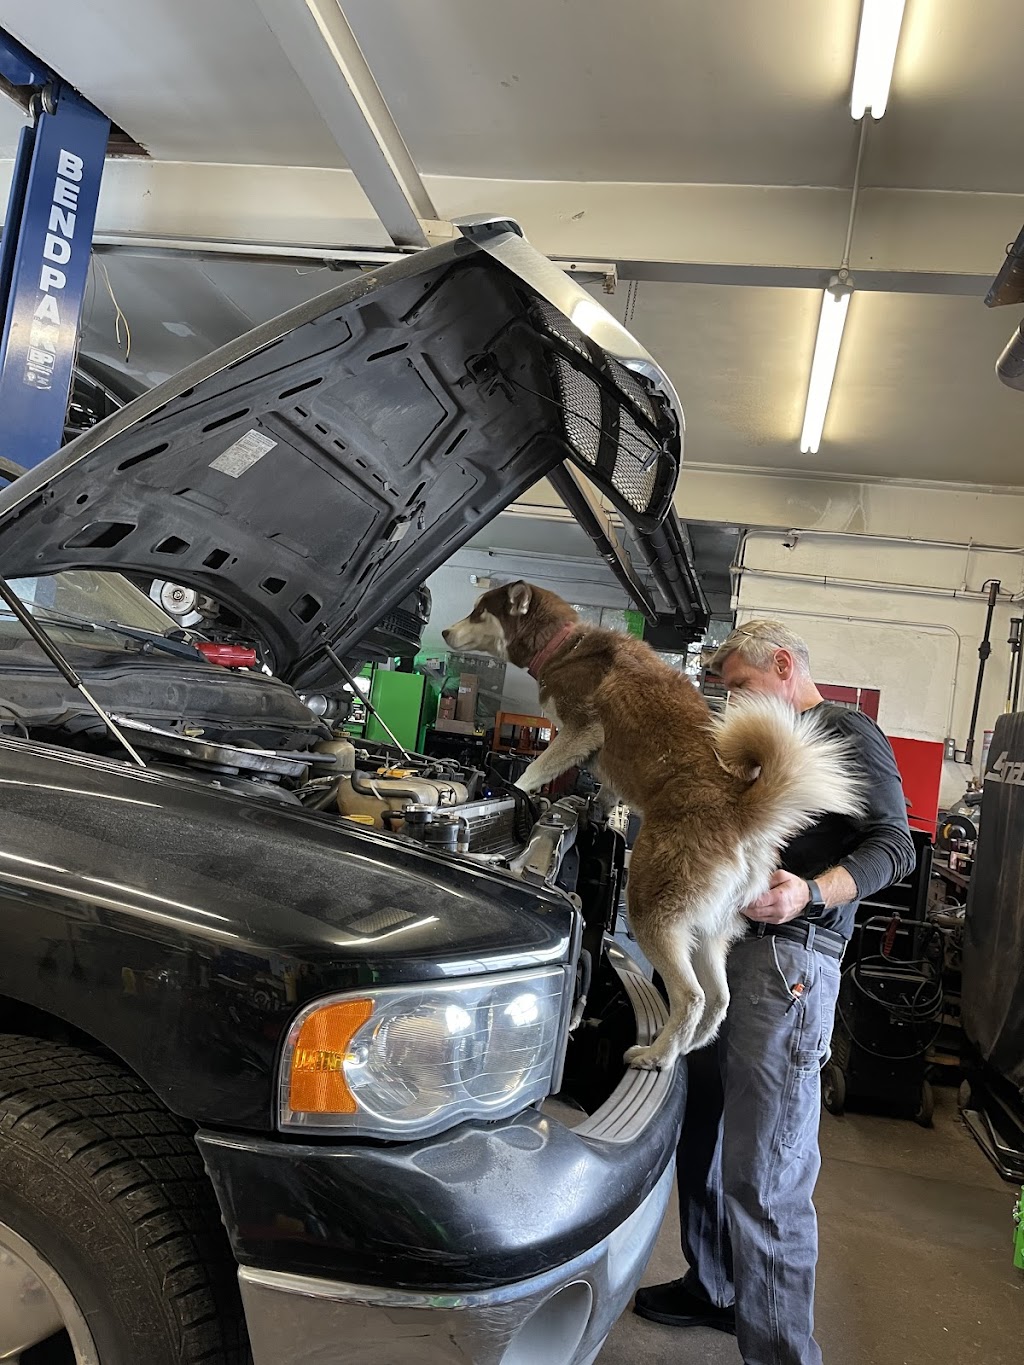 Schuch Family Auto Repair | 4934 Cypress Ave, Feasterville-Trevose, PA 19053 | Phone: (215) 355-3816